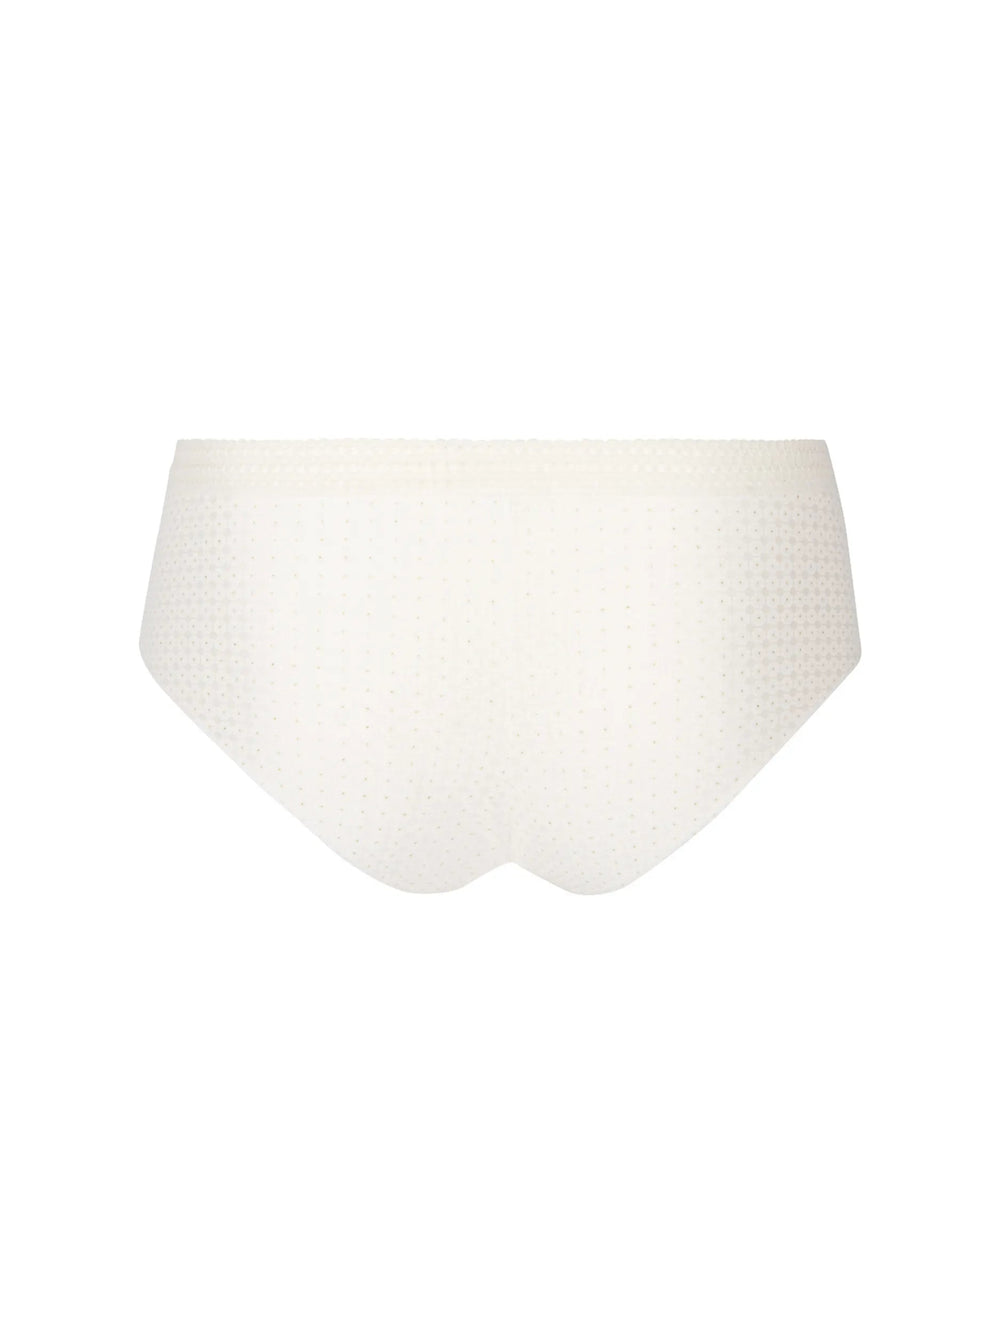 Antigel By Lise Charmel Daily Paillette Boyshort - 네이커 Paillette Shorty Antigel by Lise Charmel